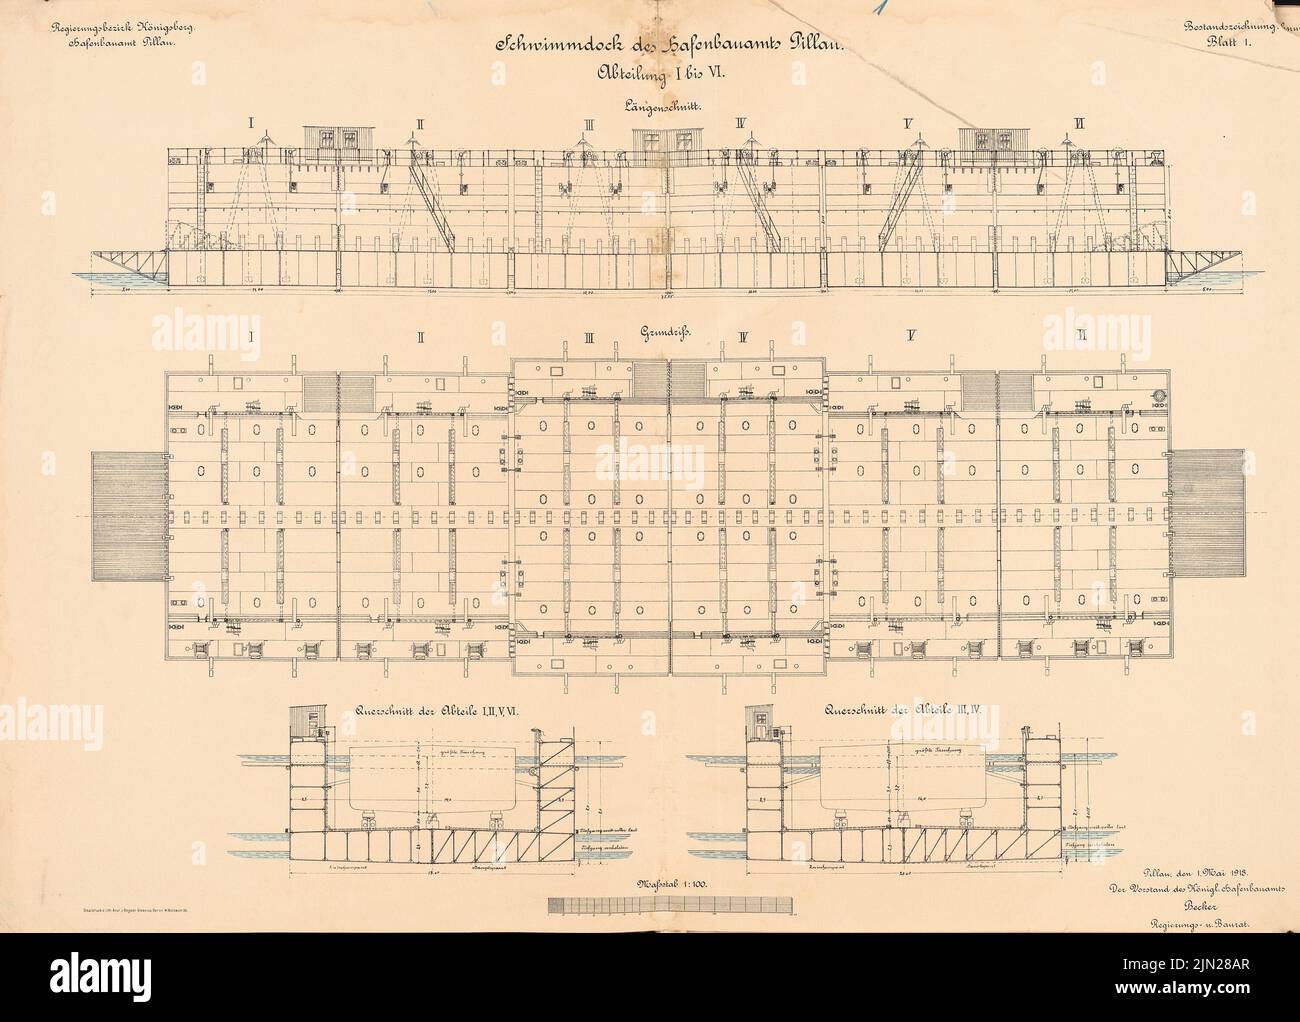 N.N., swimming dock of the port construction inspection, Pillau: Department I-VI: floor plan, cuts 1: 100. Lithograph colored on paper, 60.9 x 84.9 cm (including scan edges) Stock Photo